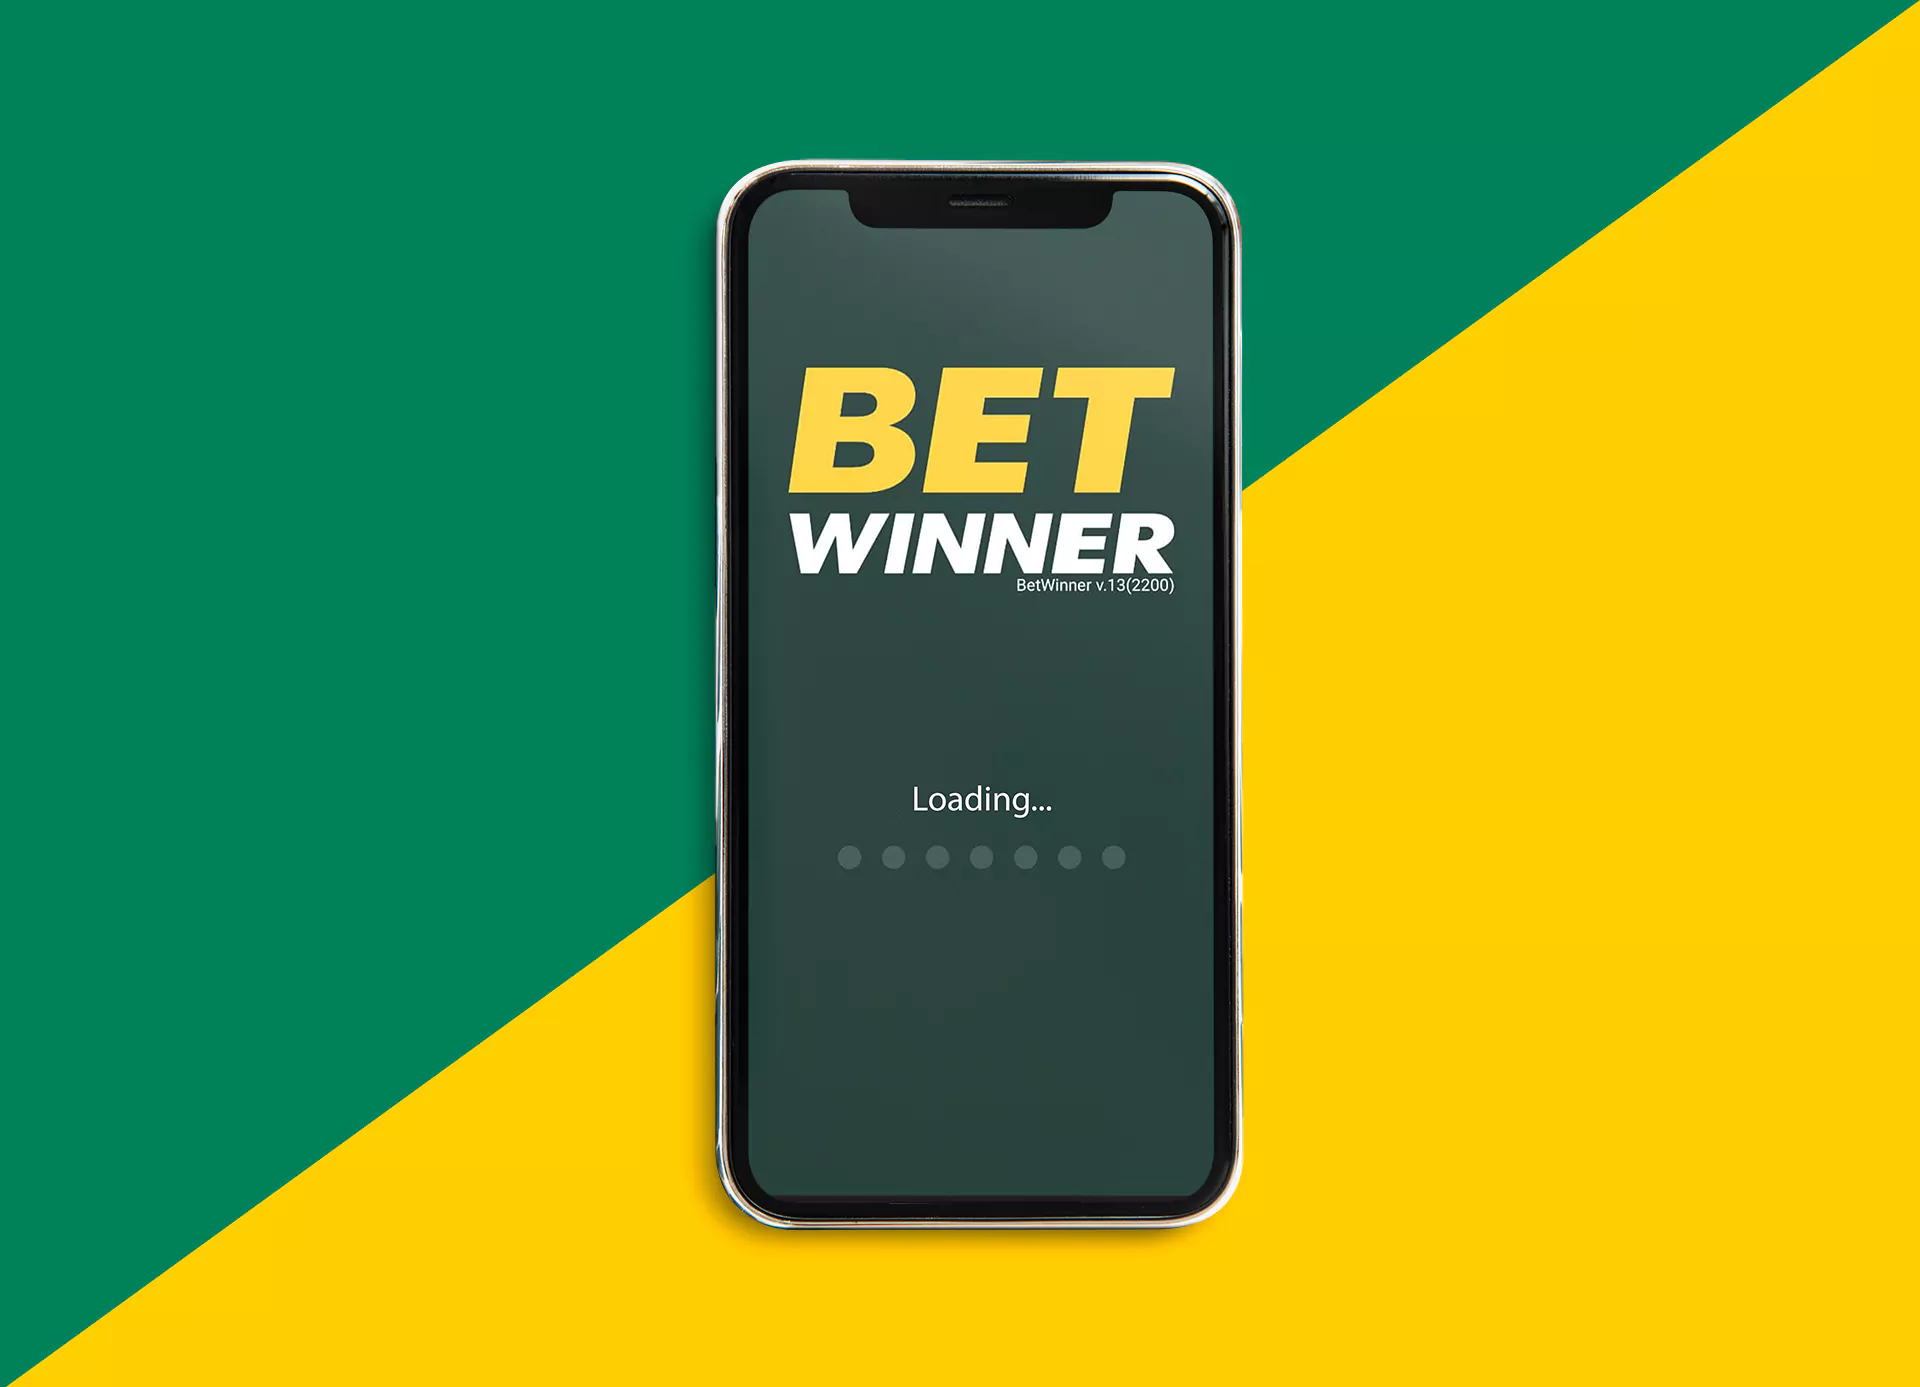 Initiate the installation of the Betwinner app.